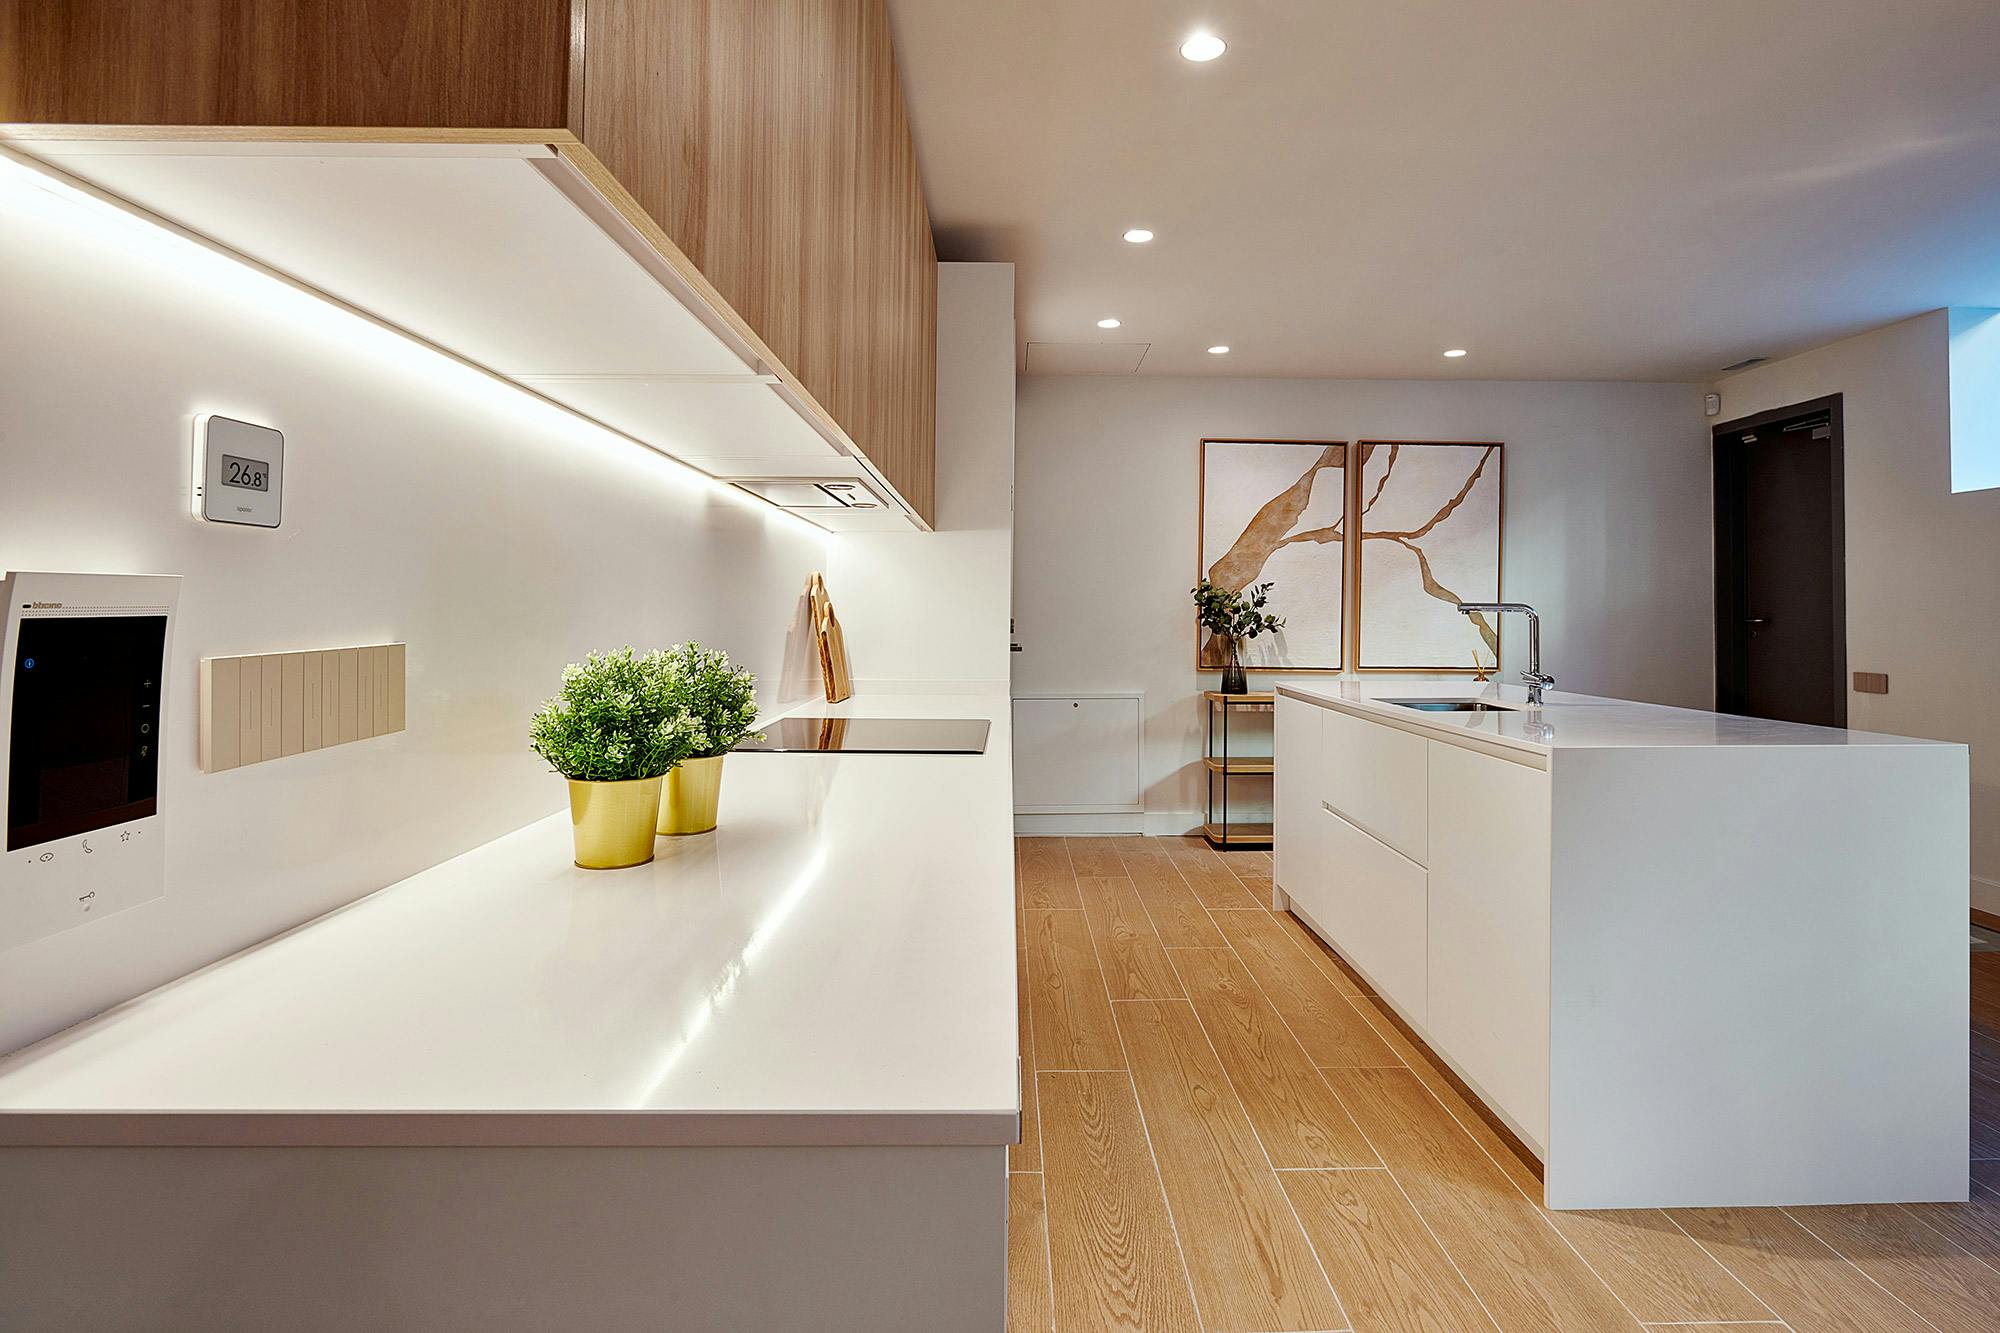 Numéro d'image 42 de la section actuelle de Cosentino, the star of the new functional, modern and sustainable house in the AEDAS Homes showroom in Madrid de Cosentino France